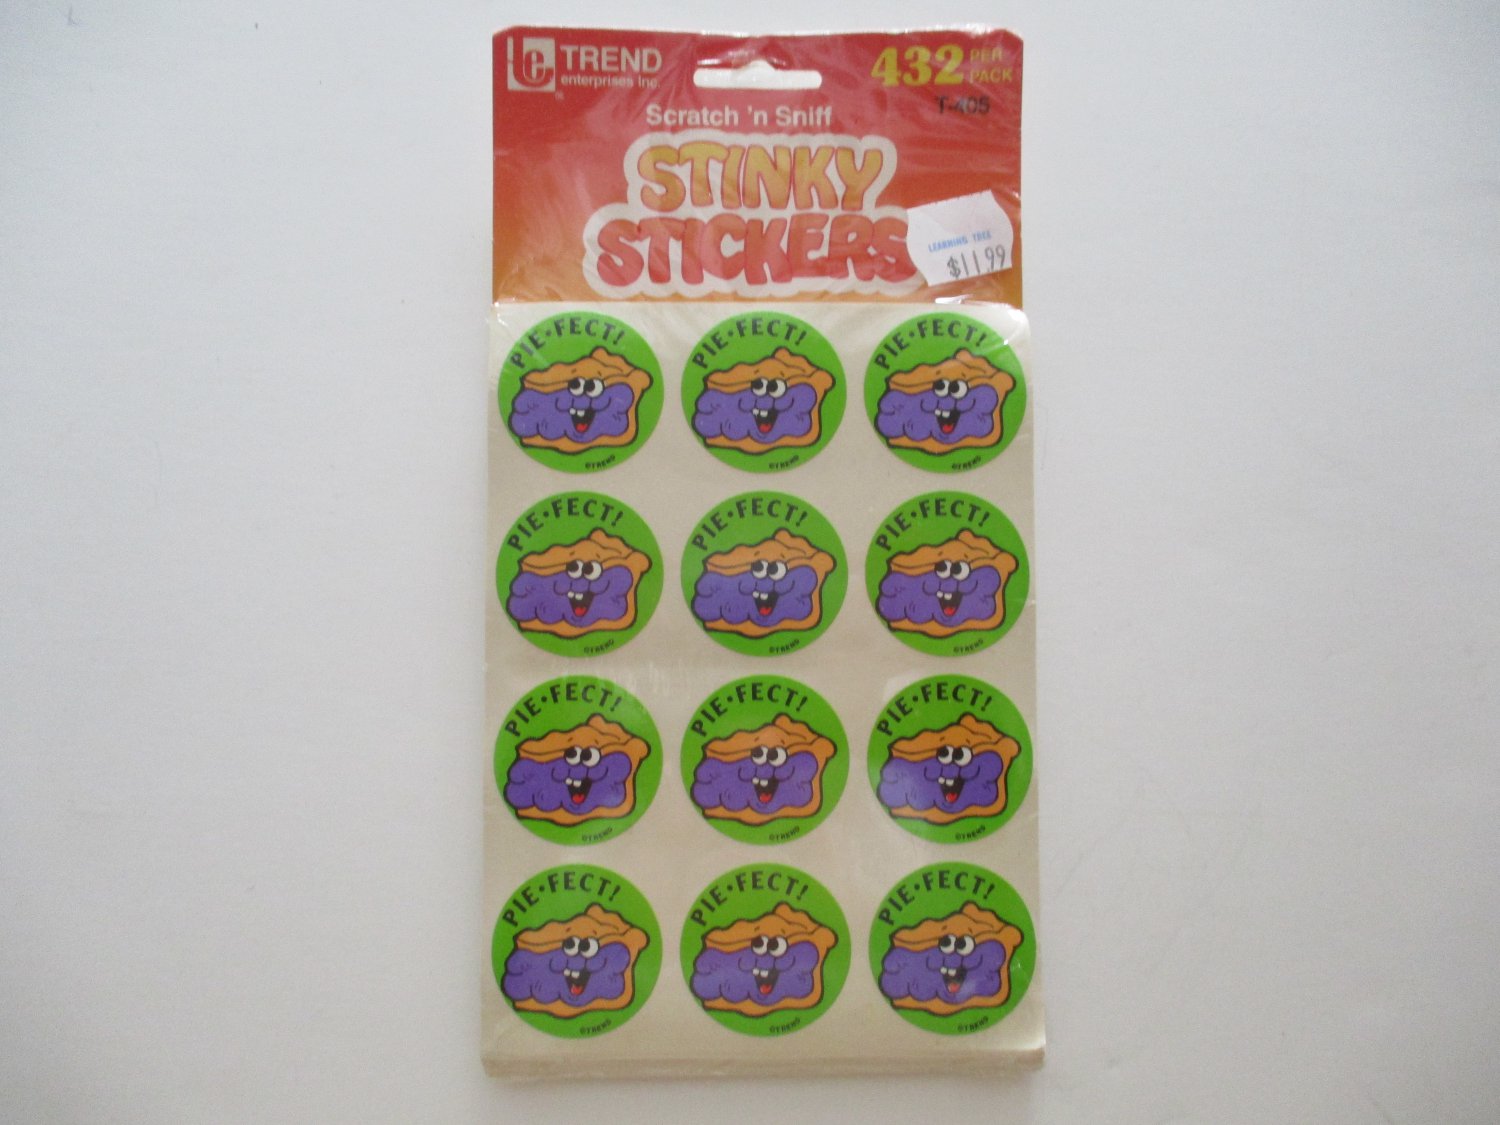 Trend Stinky Stickers Sealed Scratch â��n Sniff Pack of 432